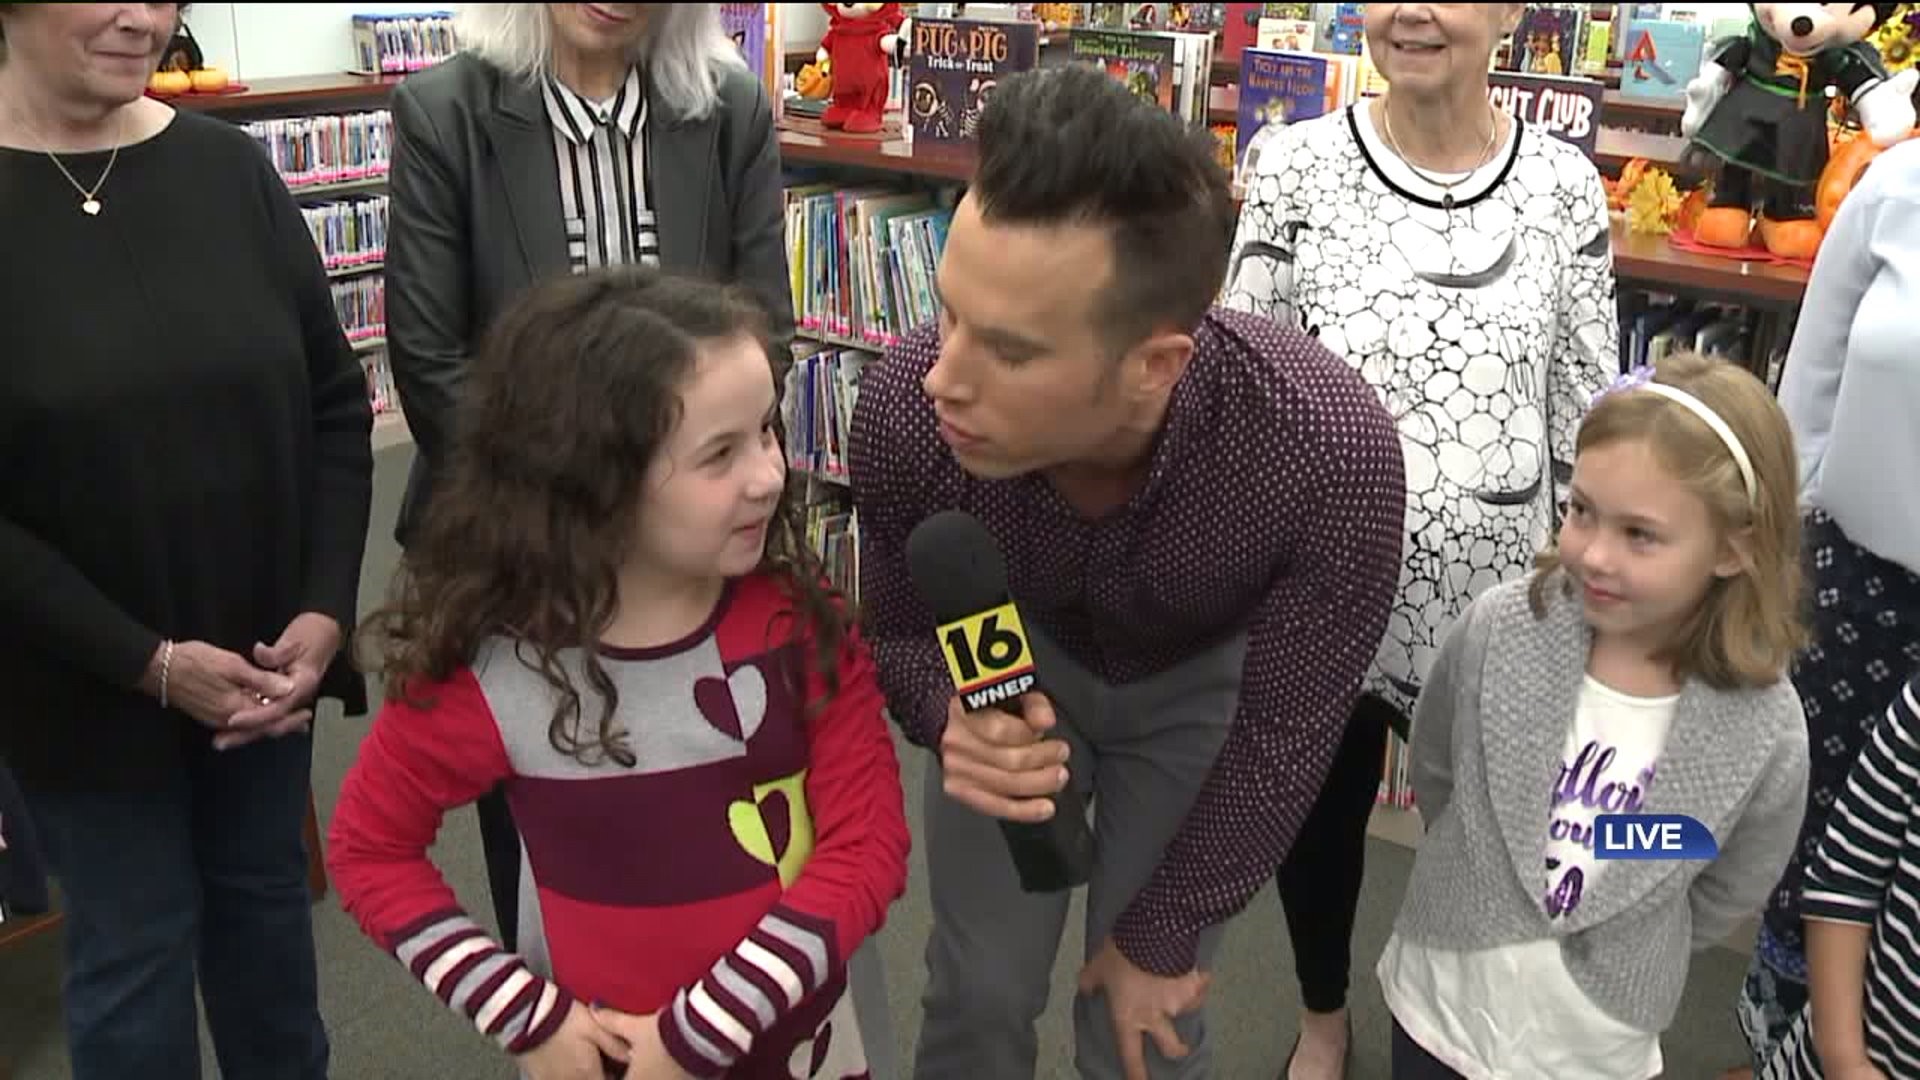 Leckey Live - Literacy Group Gives Back to Kids - Part 2